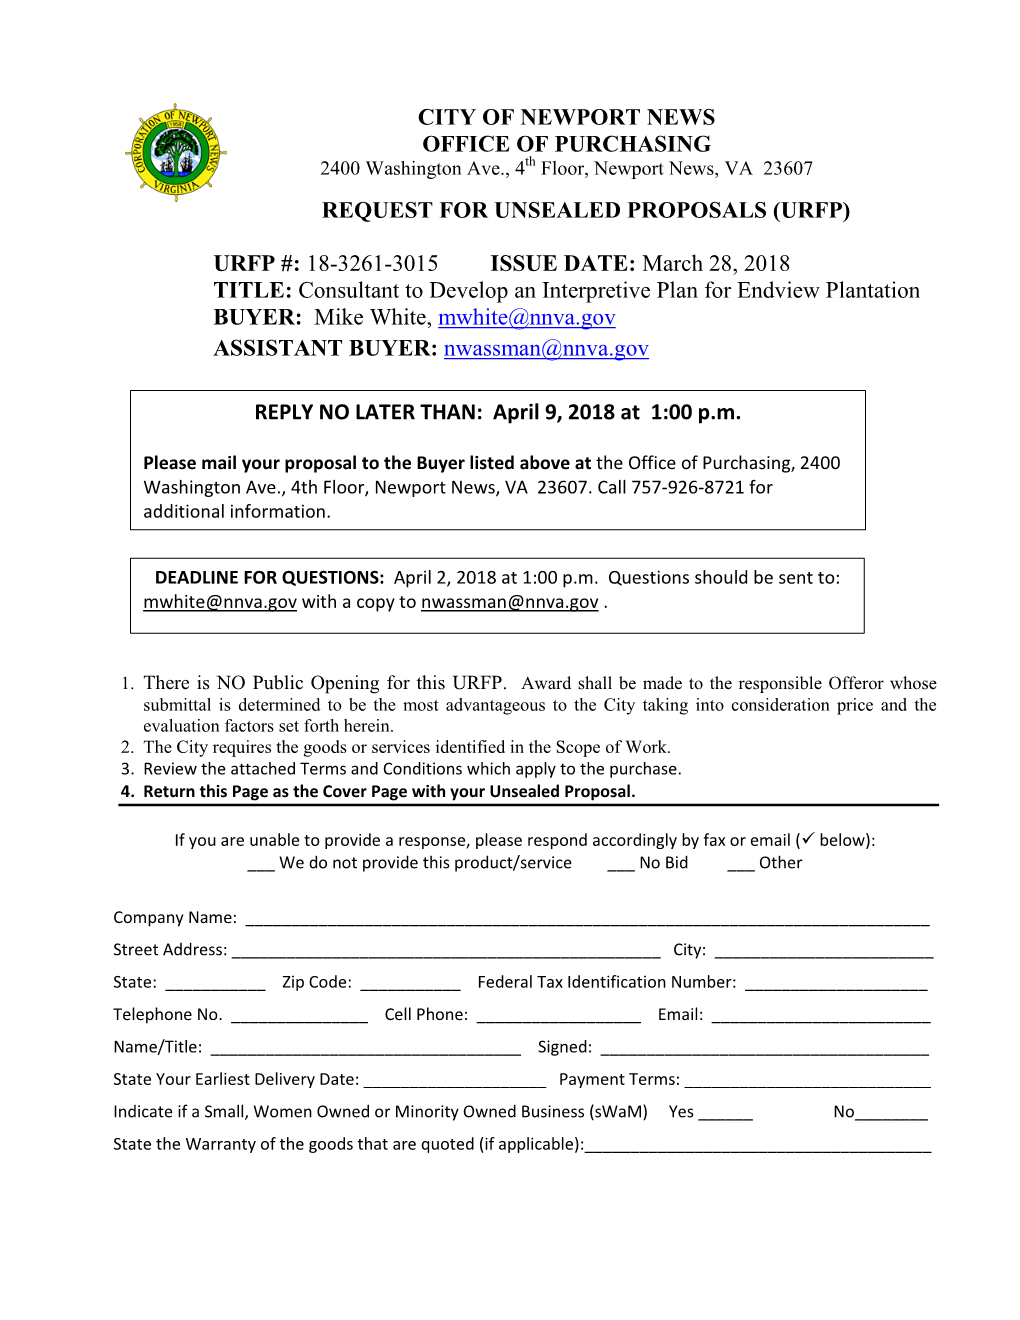 April 9, 2018 at 1:00 Pm REQUEST for UNSEALED PROPOSALS